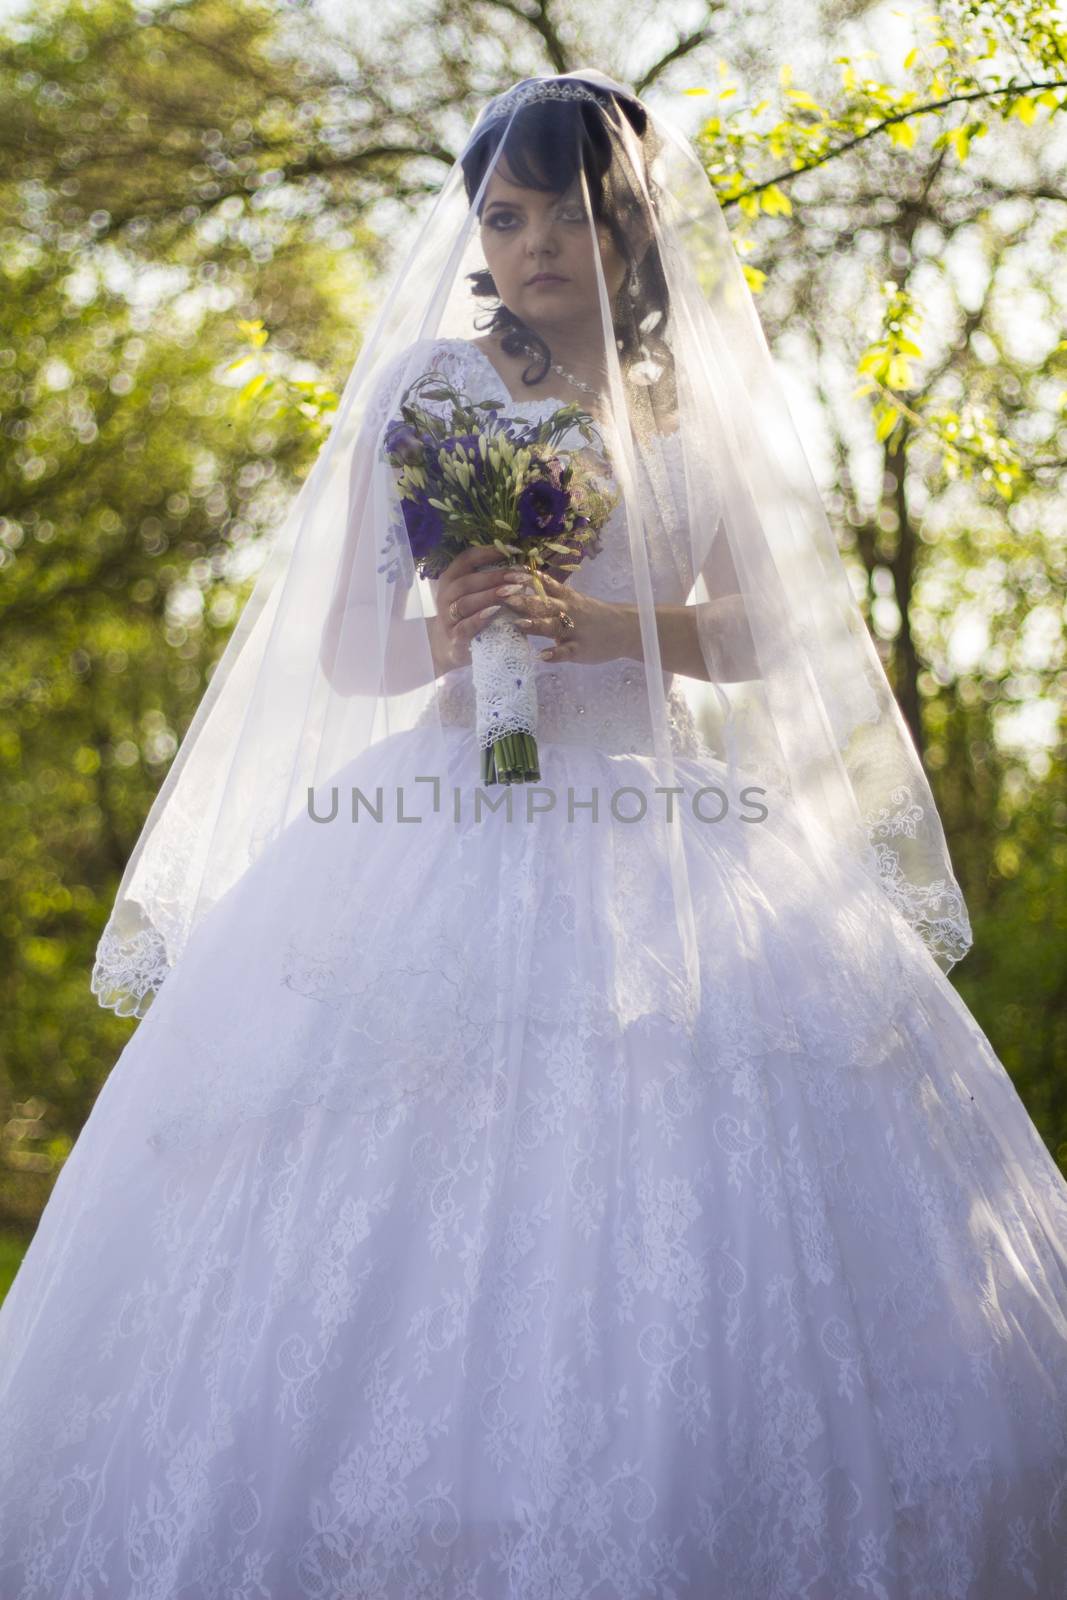 The bride is closed veil with a bouquet in hand. For your commercial and editorial use.